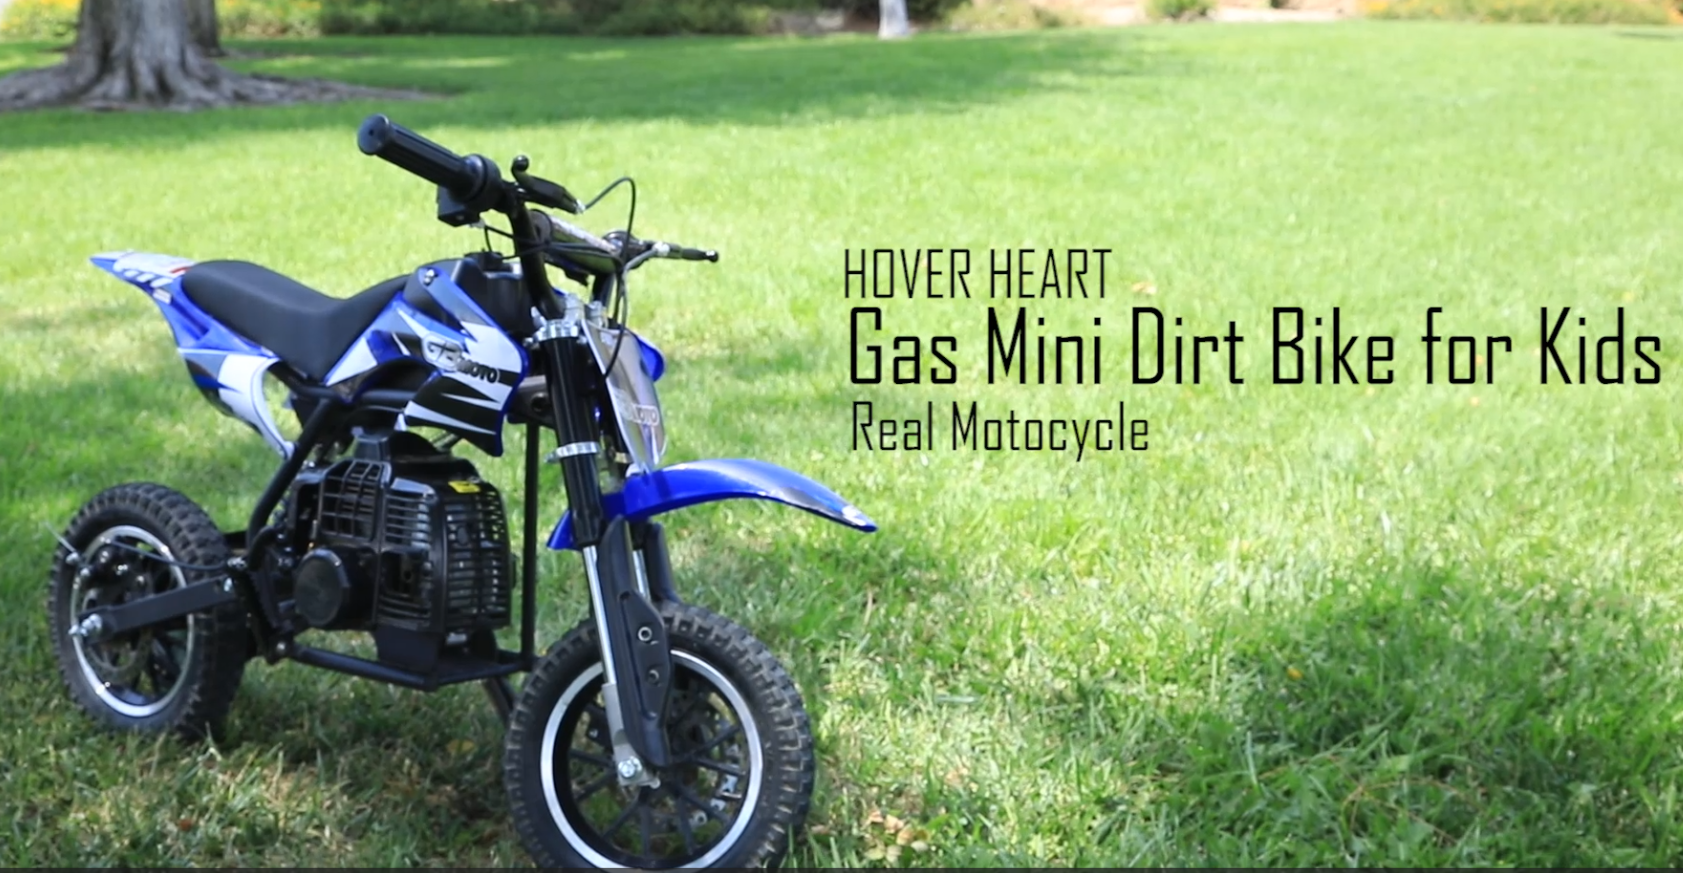 Kids Mini 50cc Gas Dirt Bike, DB1 Model 2 Stroke Ride On Bike with Off-Road Tire, Shocks, Pull Start, Oil Mixed Required, Support Up to 165lbs